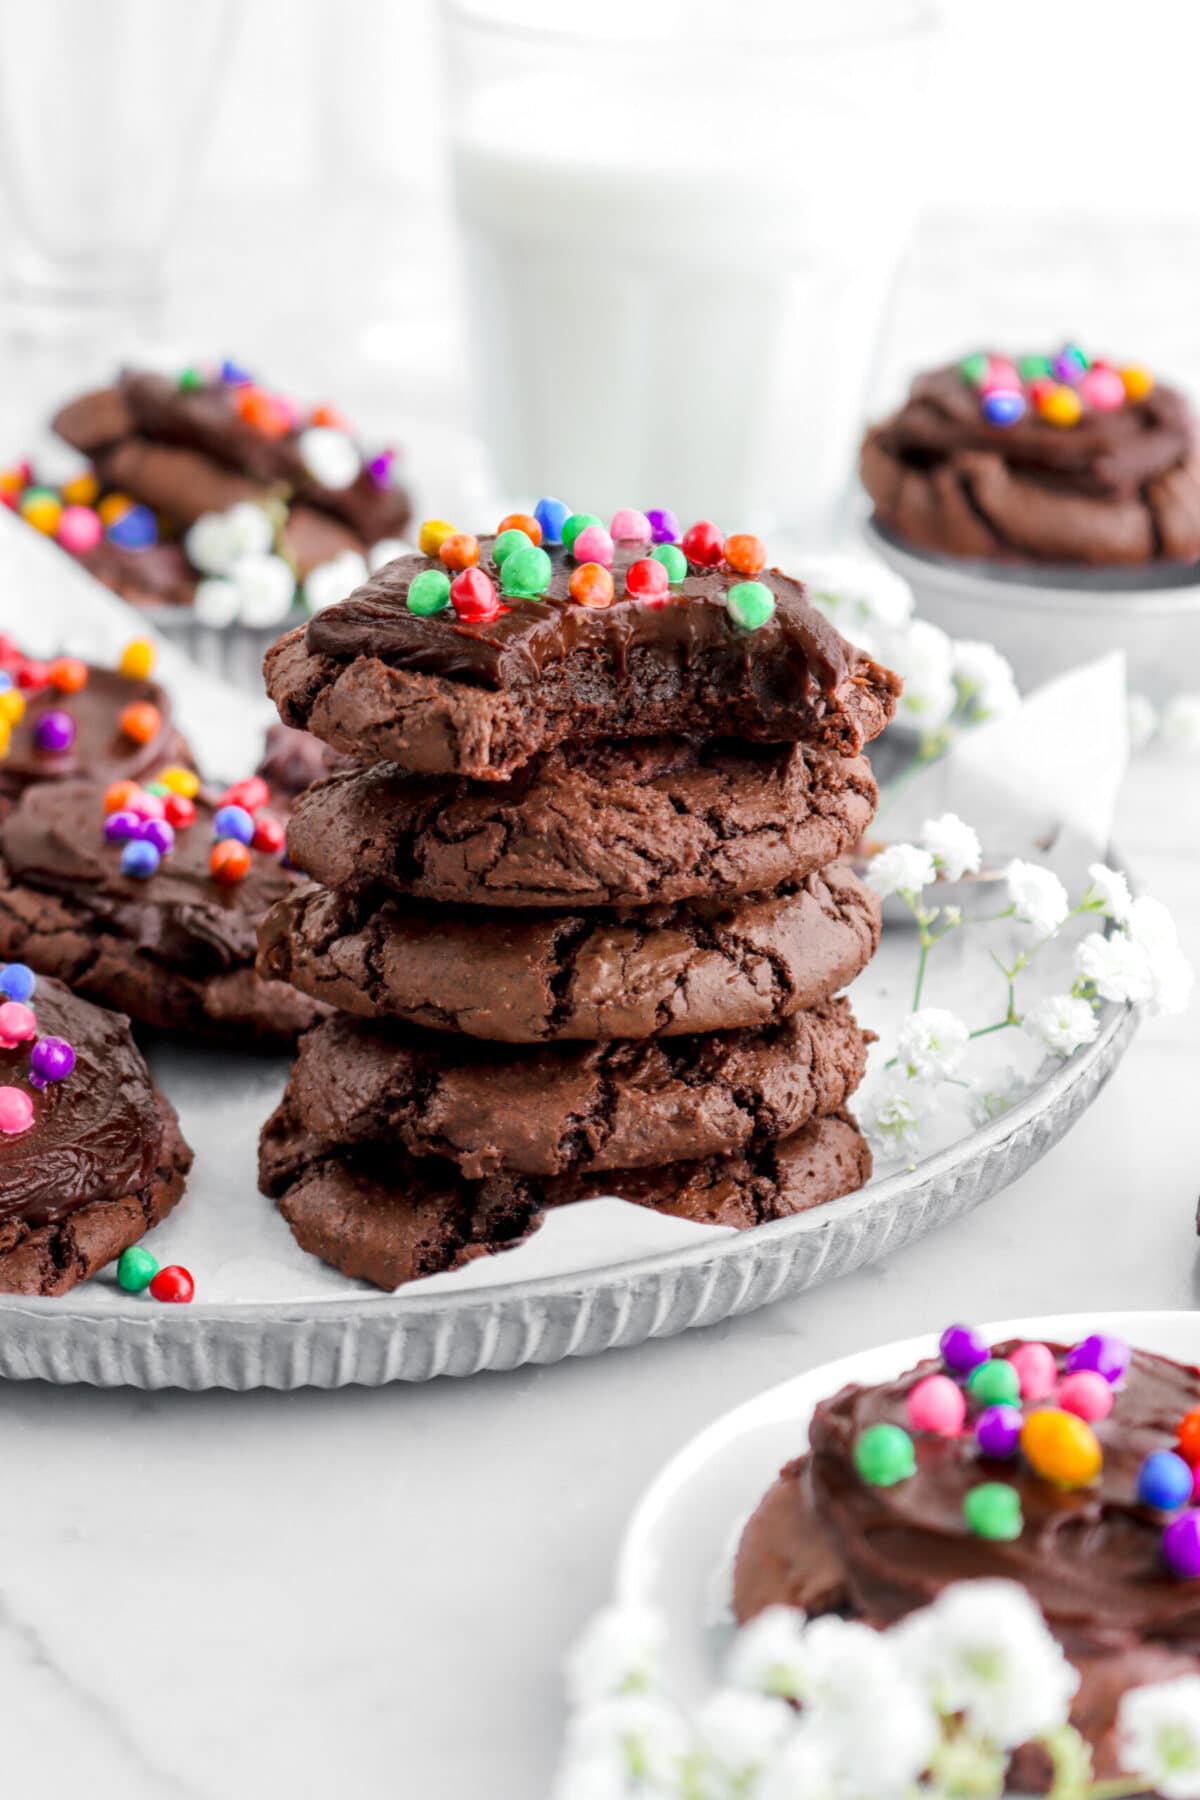 stacked cosmic brownie cookies on metal plate with more cookies around, white flowers, and a glass of milk behind.